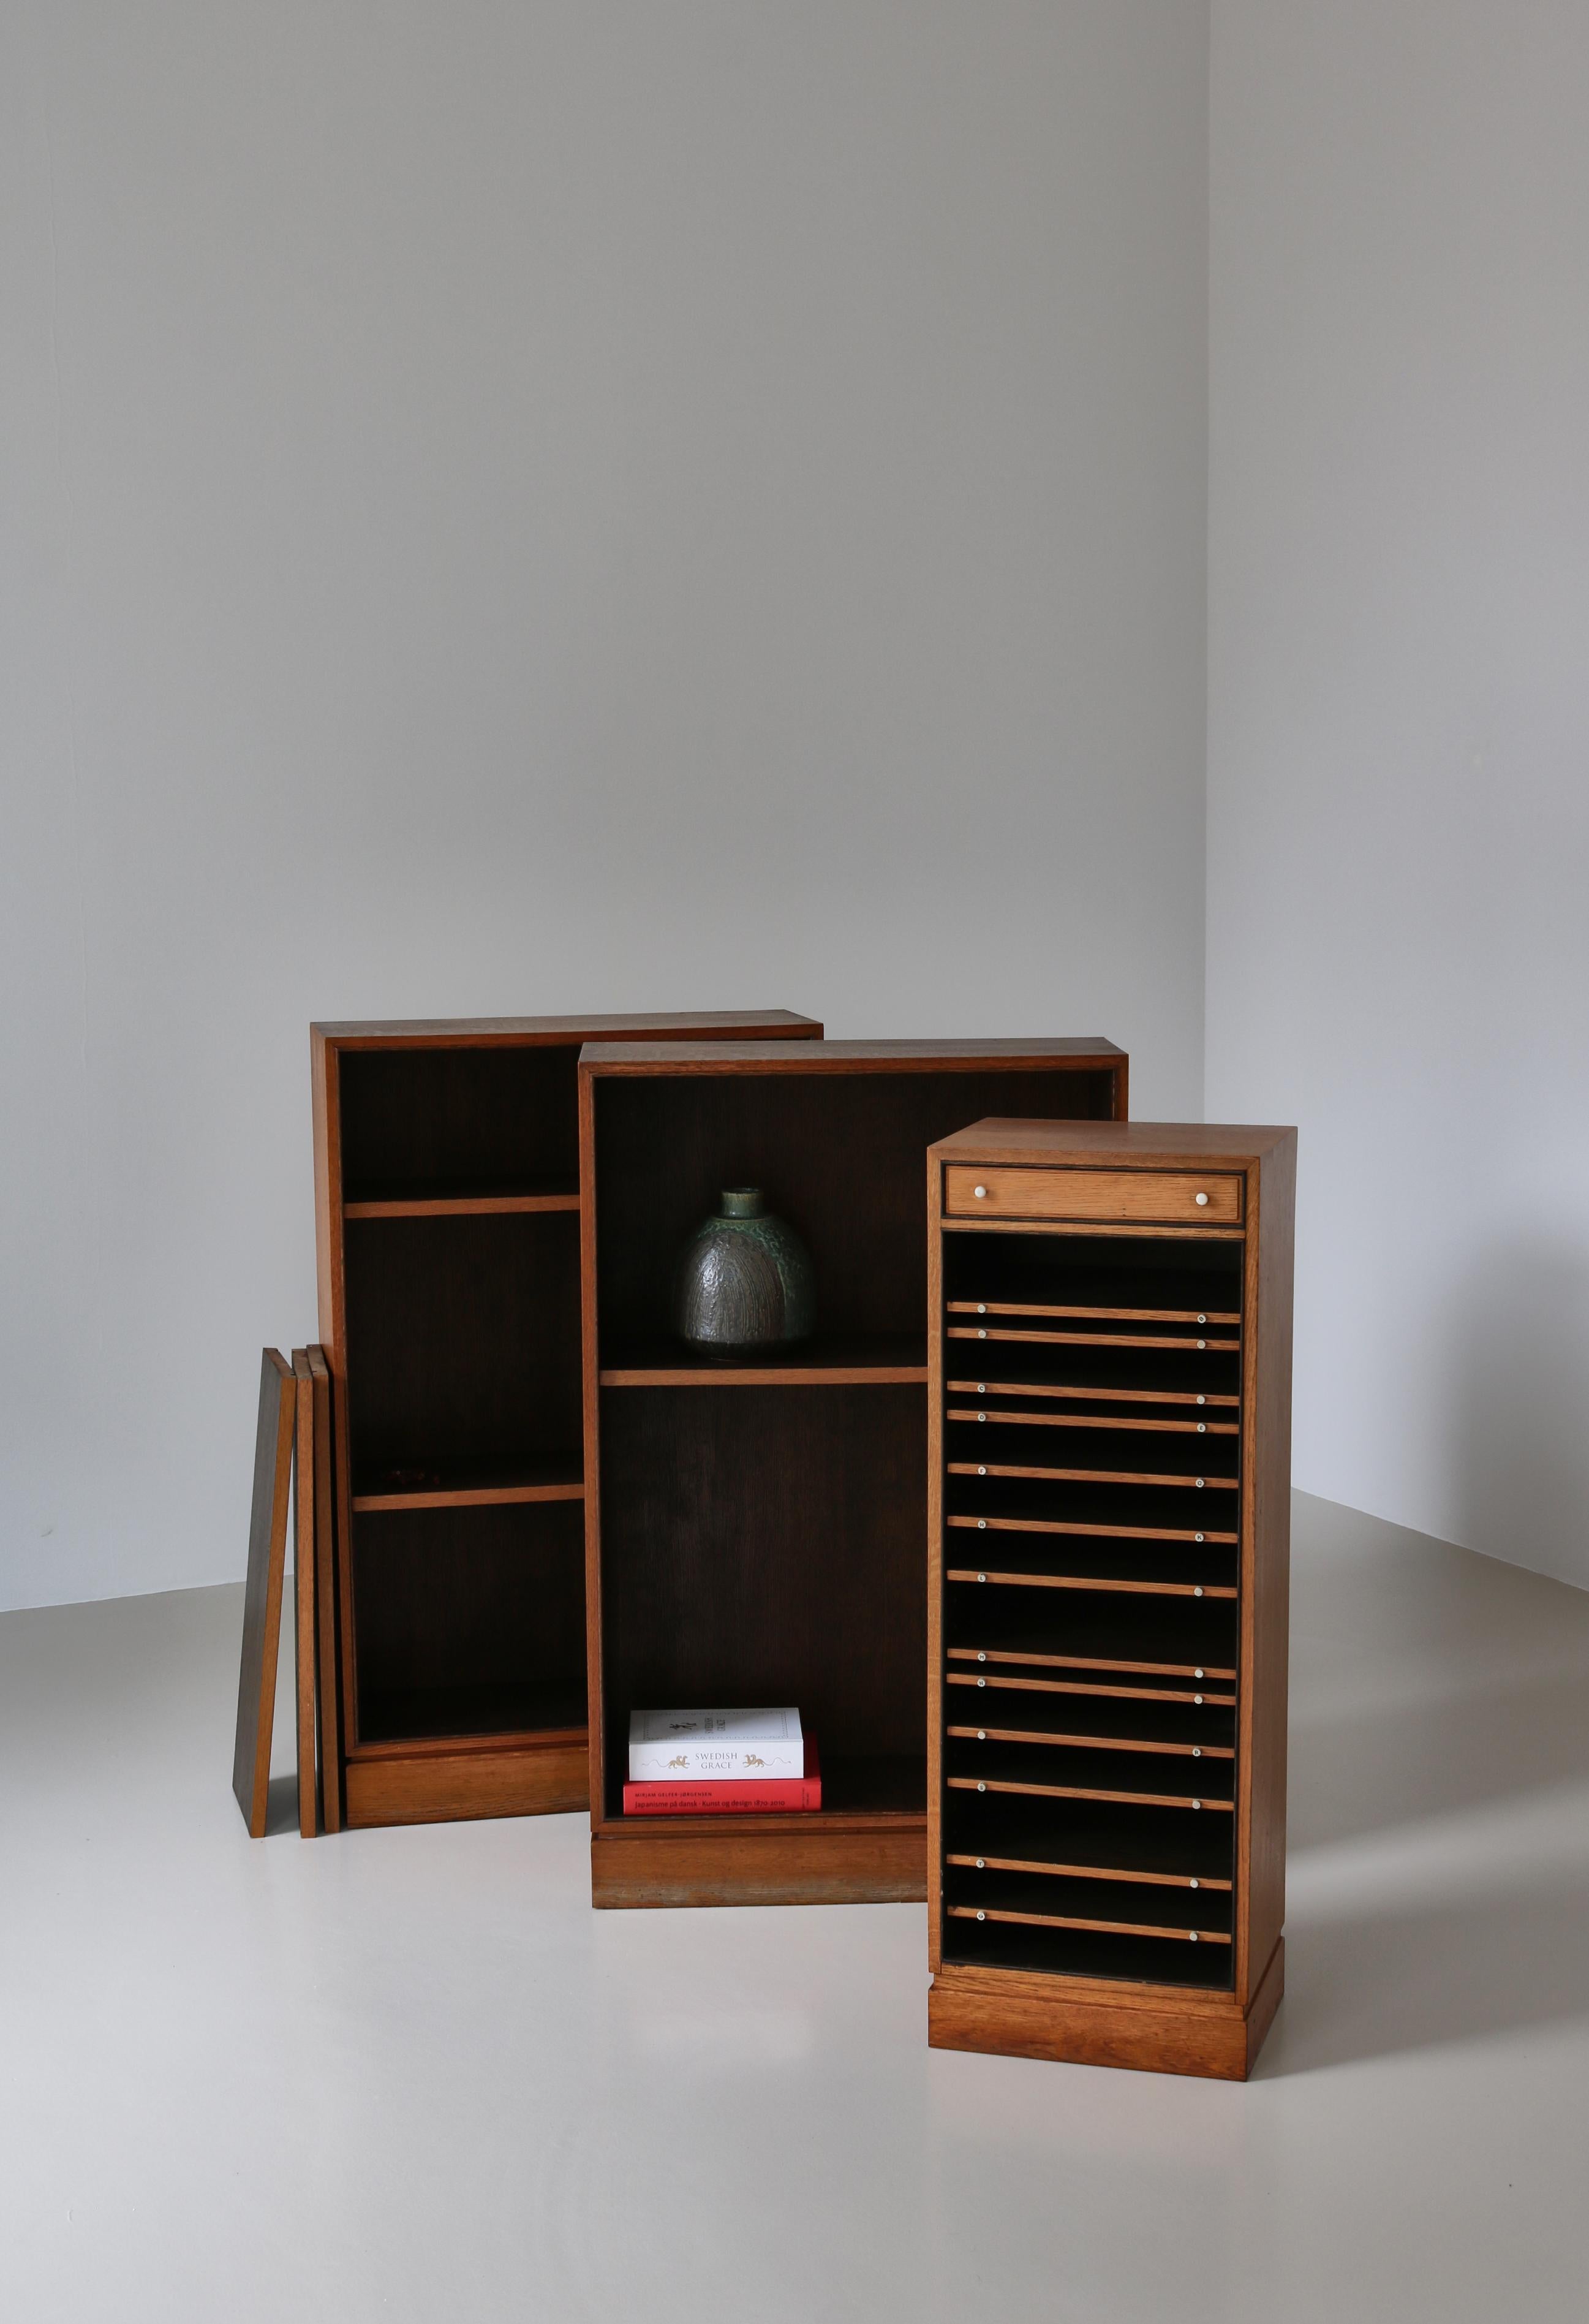 A decorative oak cabinet made by Danish cabinetmaker I.P. Mørck, Copenhagen in the 1930s. The cabinet is simple and functional with adjustable filing shelves and a top drawer with dovetail joints and handles in white bakelite. Elegant handmade